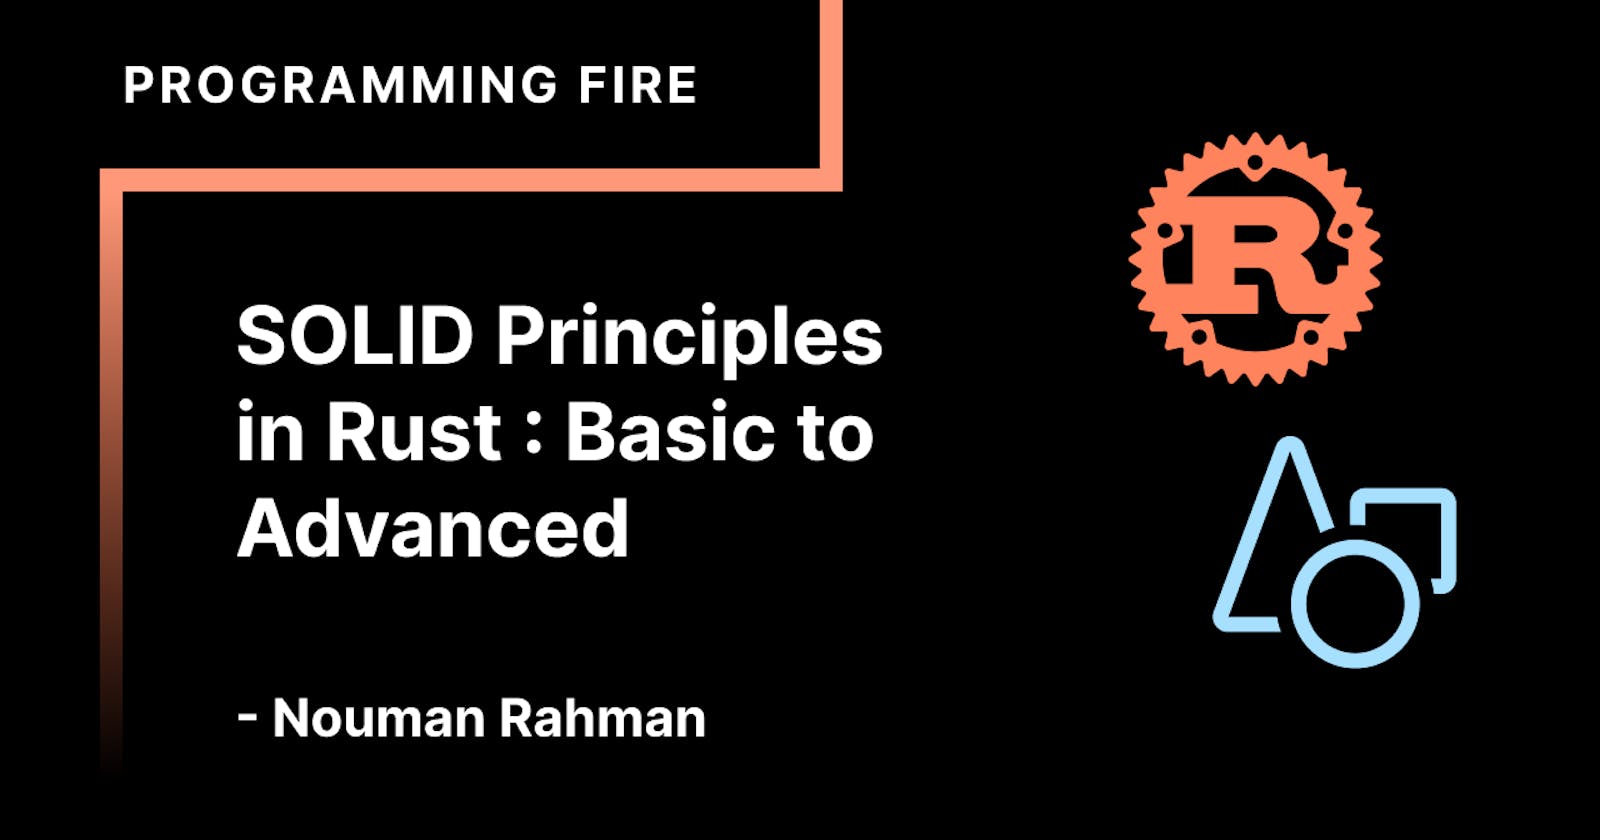 SOLID Principles in Rust: Basic to Advanced